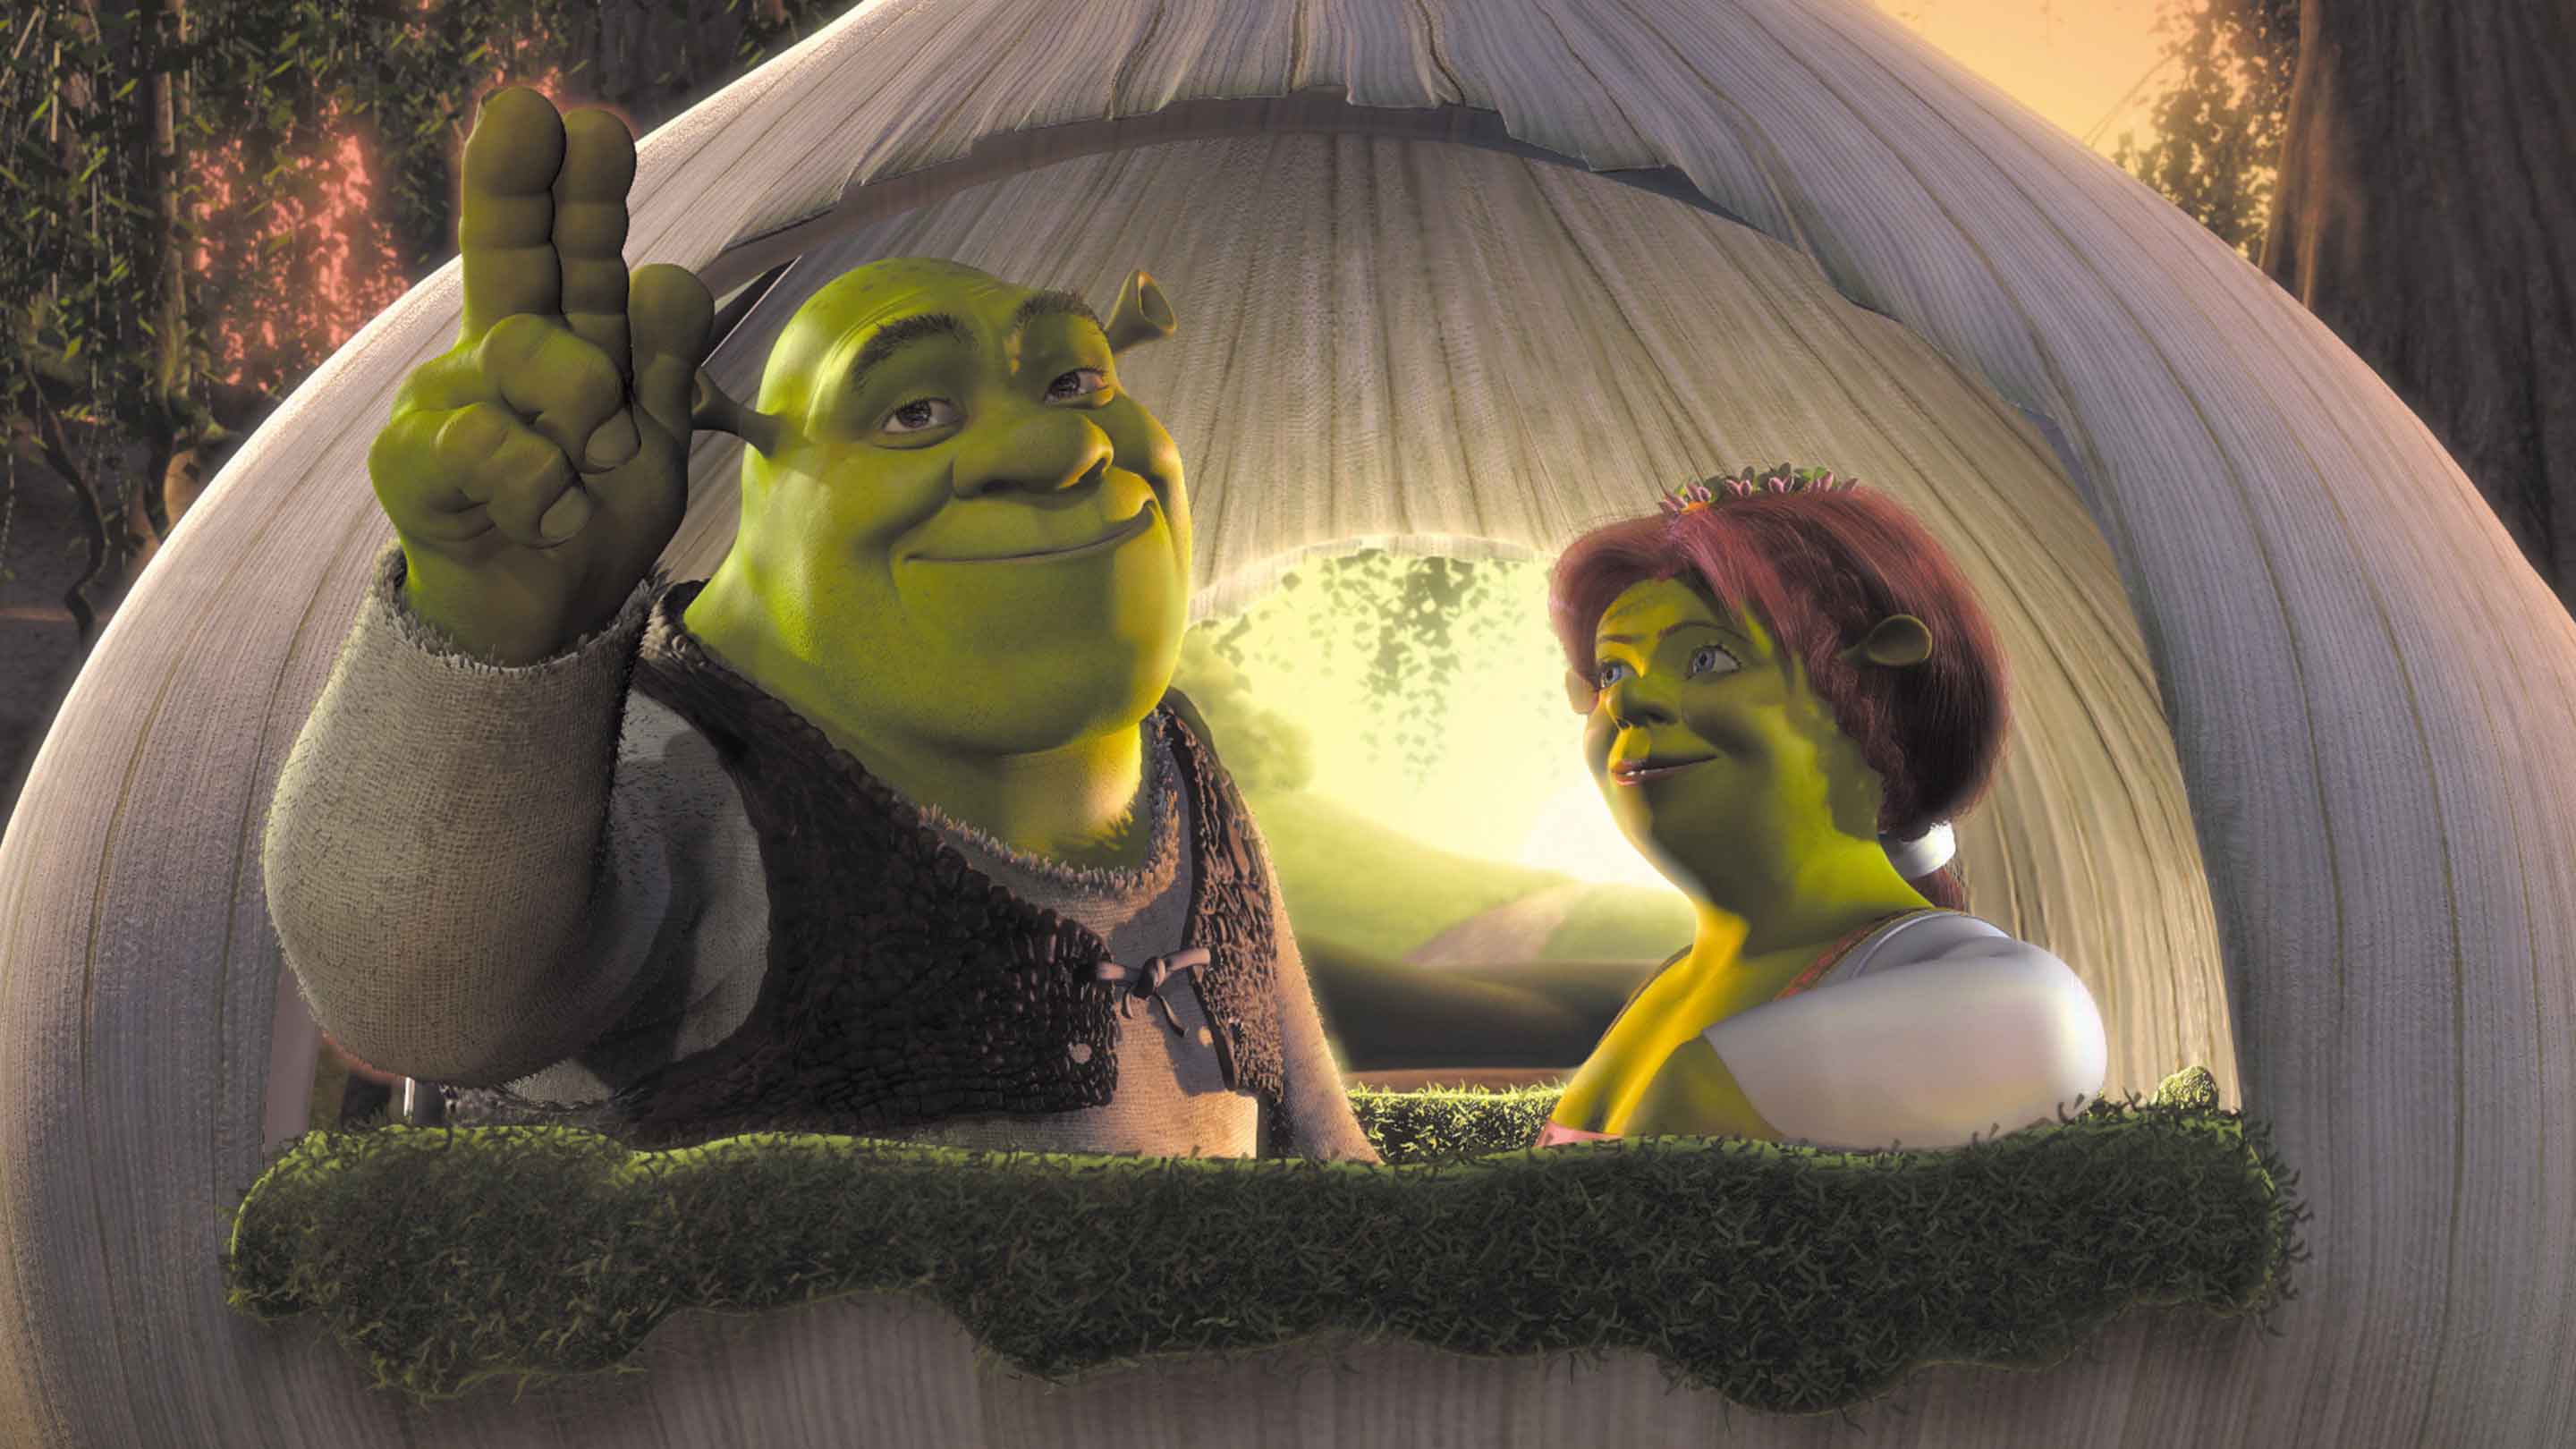 Shrek Cartoon Goodies, videos, images, GIFs and toys